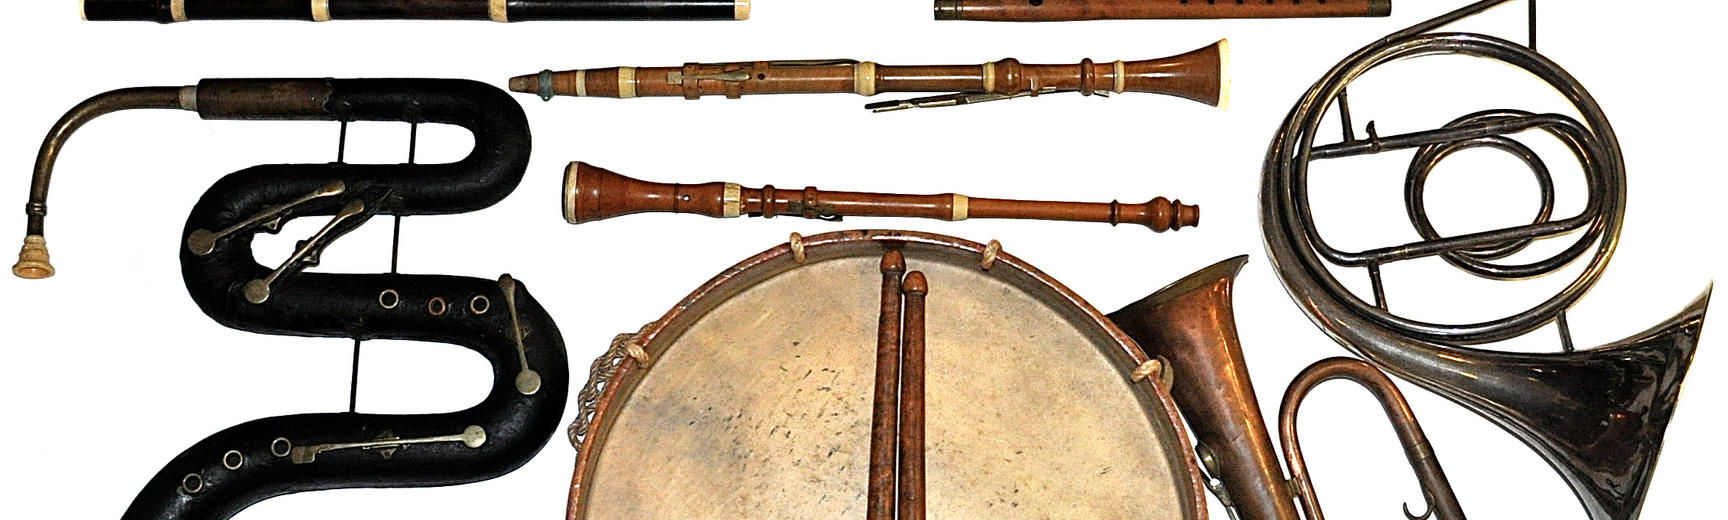 Instruments from the Bate